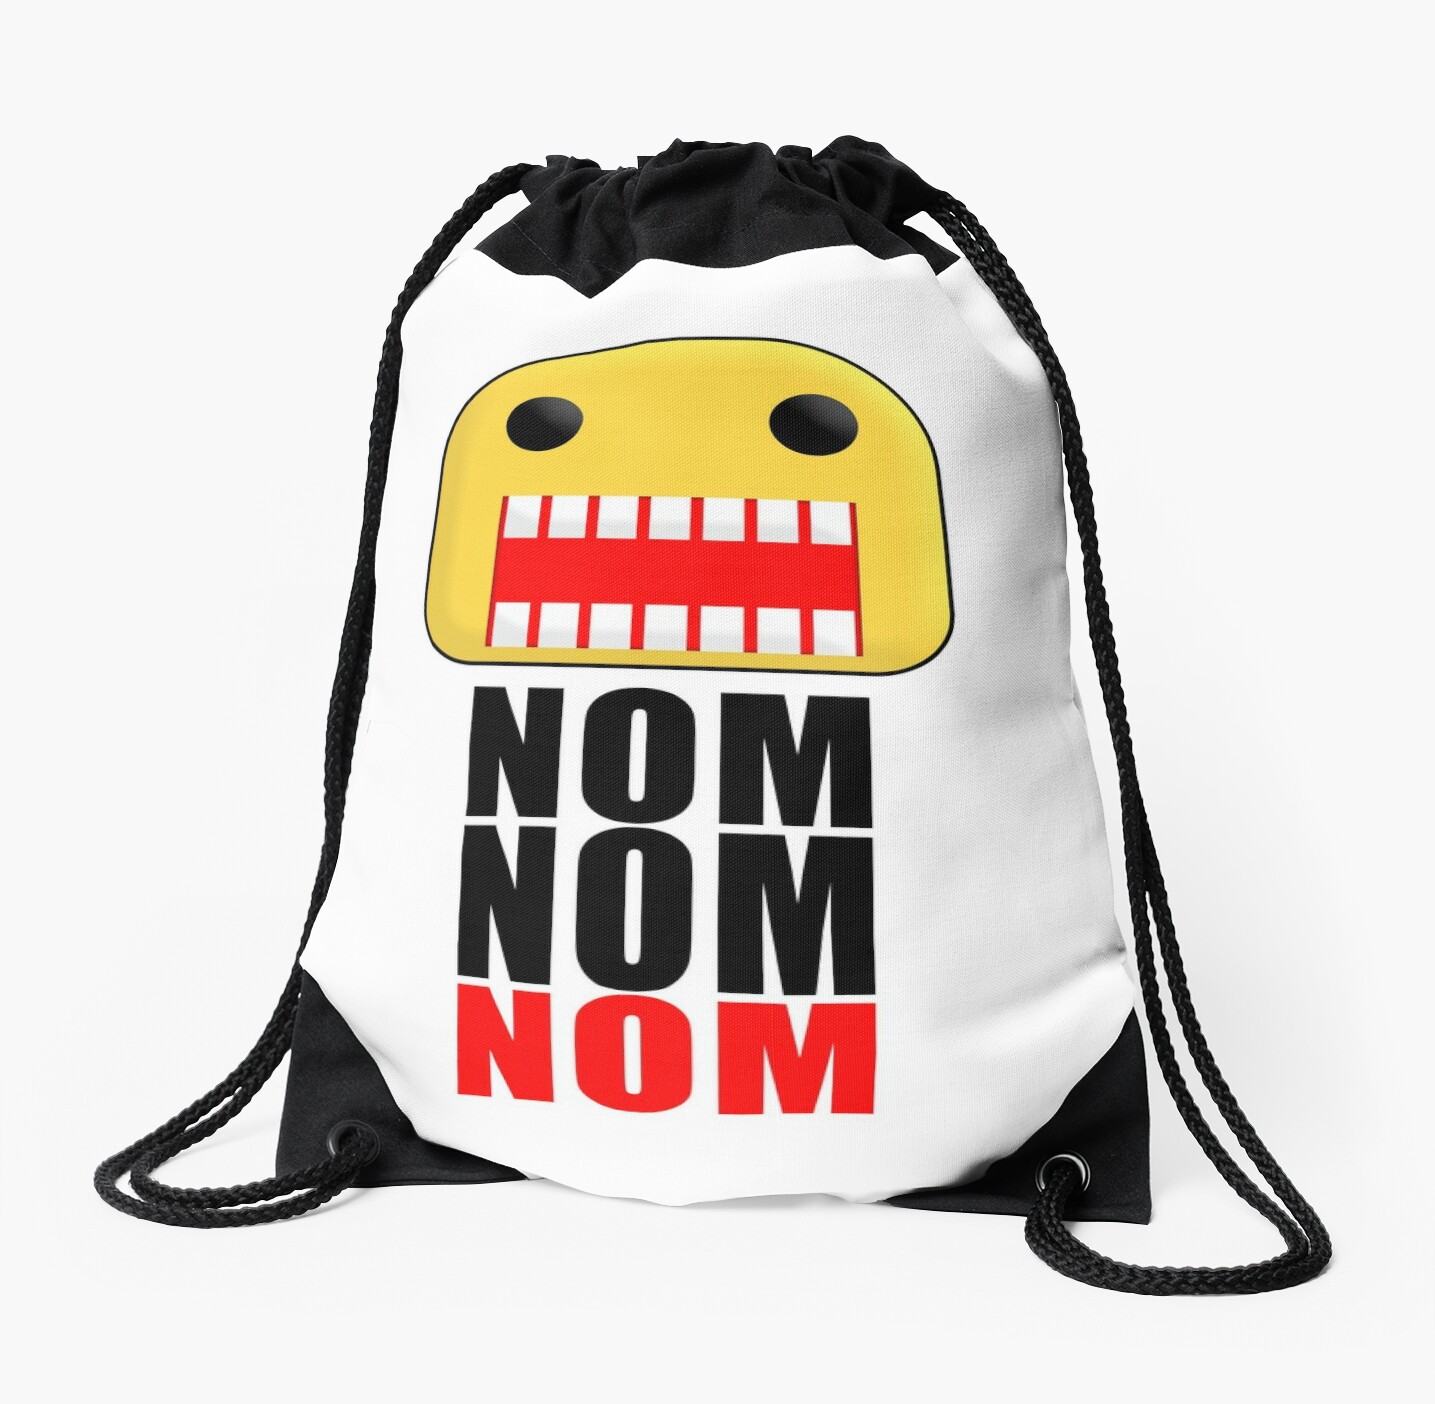 Roblox Feed The Noob Drawstring Bag By Jenr8d Designs Redbubble - roblox feed me giant noob bath mat by jenr8d designs redbubble